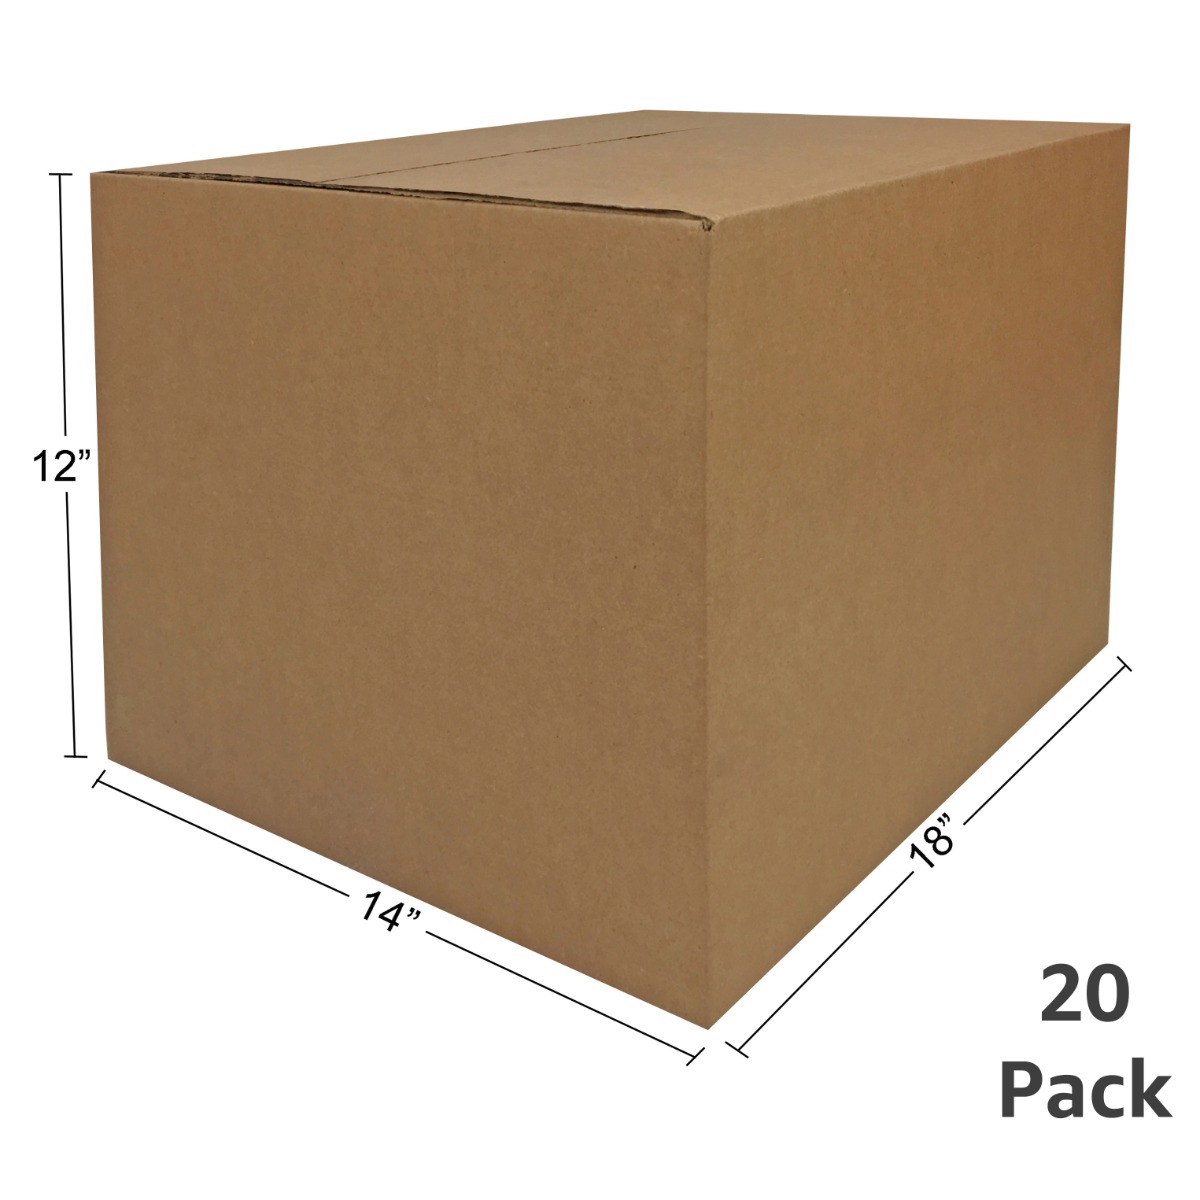 uBoxes Medium Cardboard Moving Boxes (20 Pack) 18 x 14 x 12-Inch - image 2 of 13